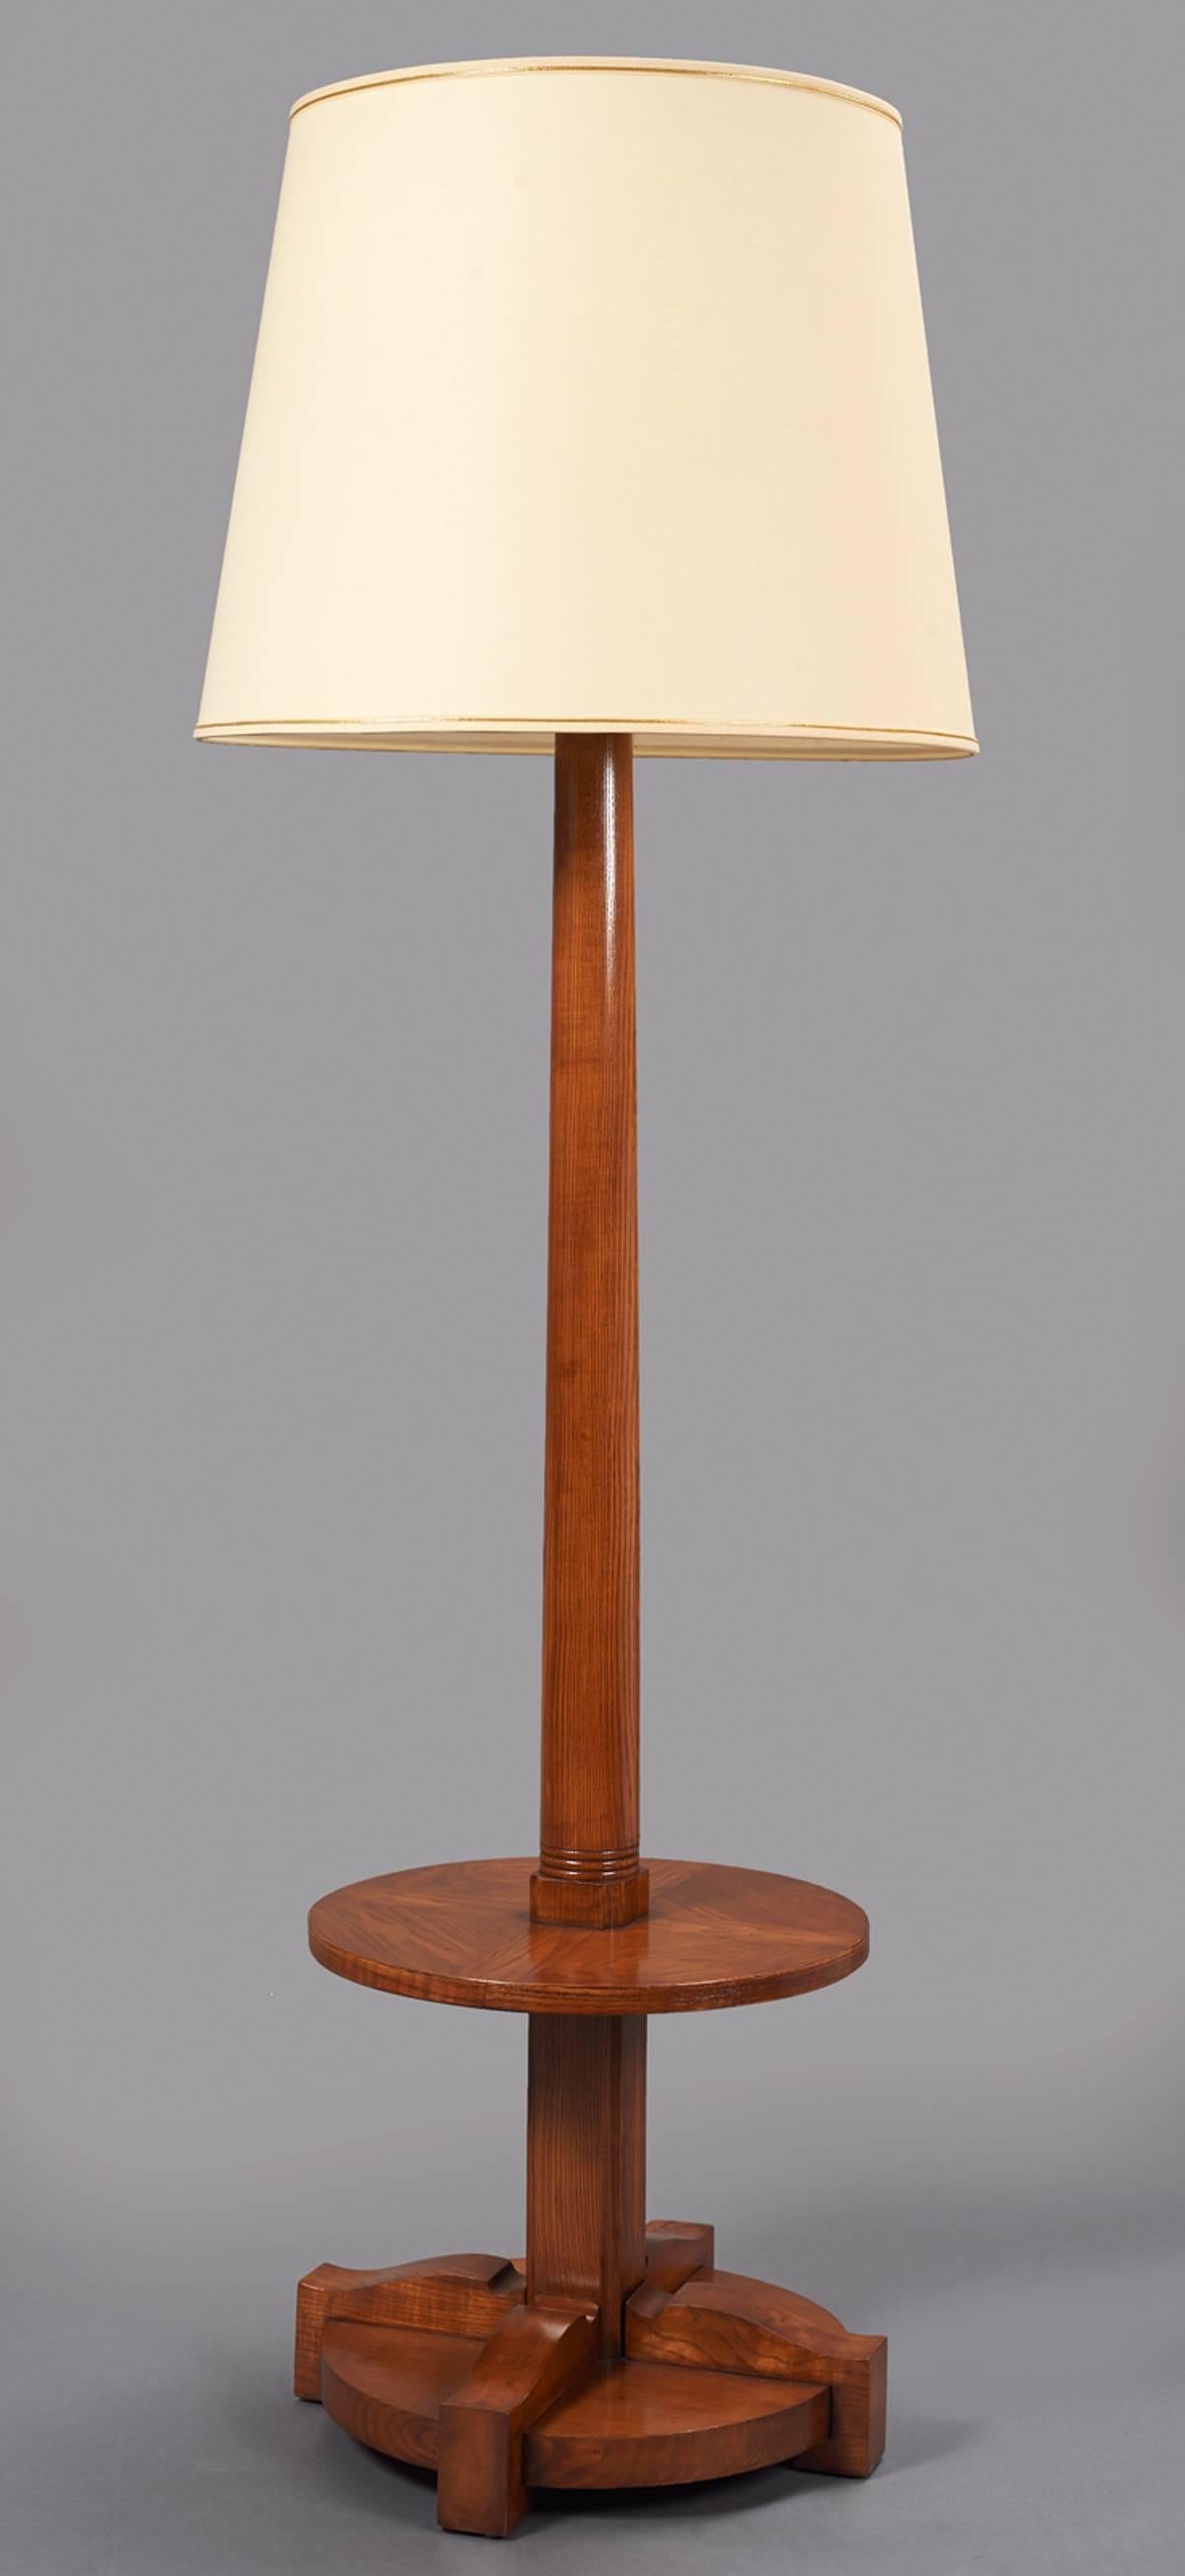 France, 1950s.
Handsome tall mahogany stained ash tapered standing lamp
with detailed mounts and tray table.
Rewired for use in the USA with three standard base bulbs.
Measures: 74 H x 24 diameter with shade/18 diameter at base.
   
        